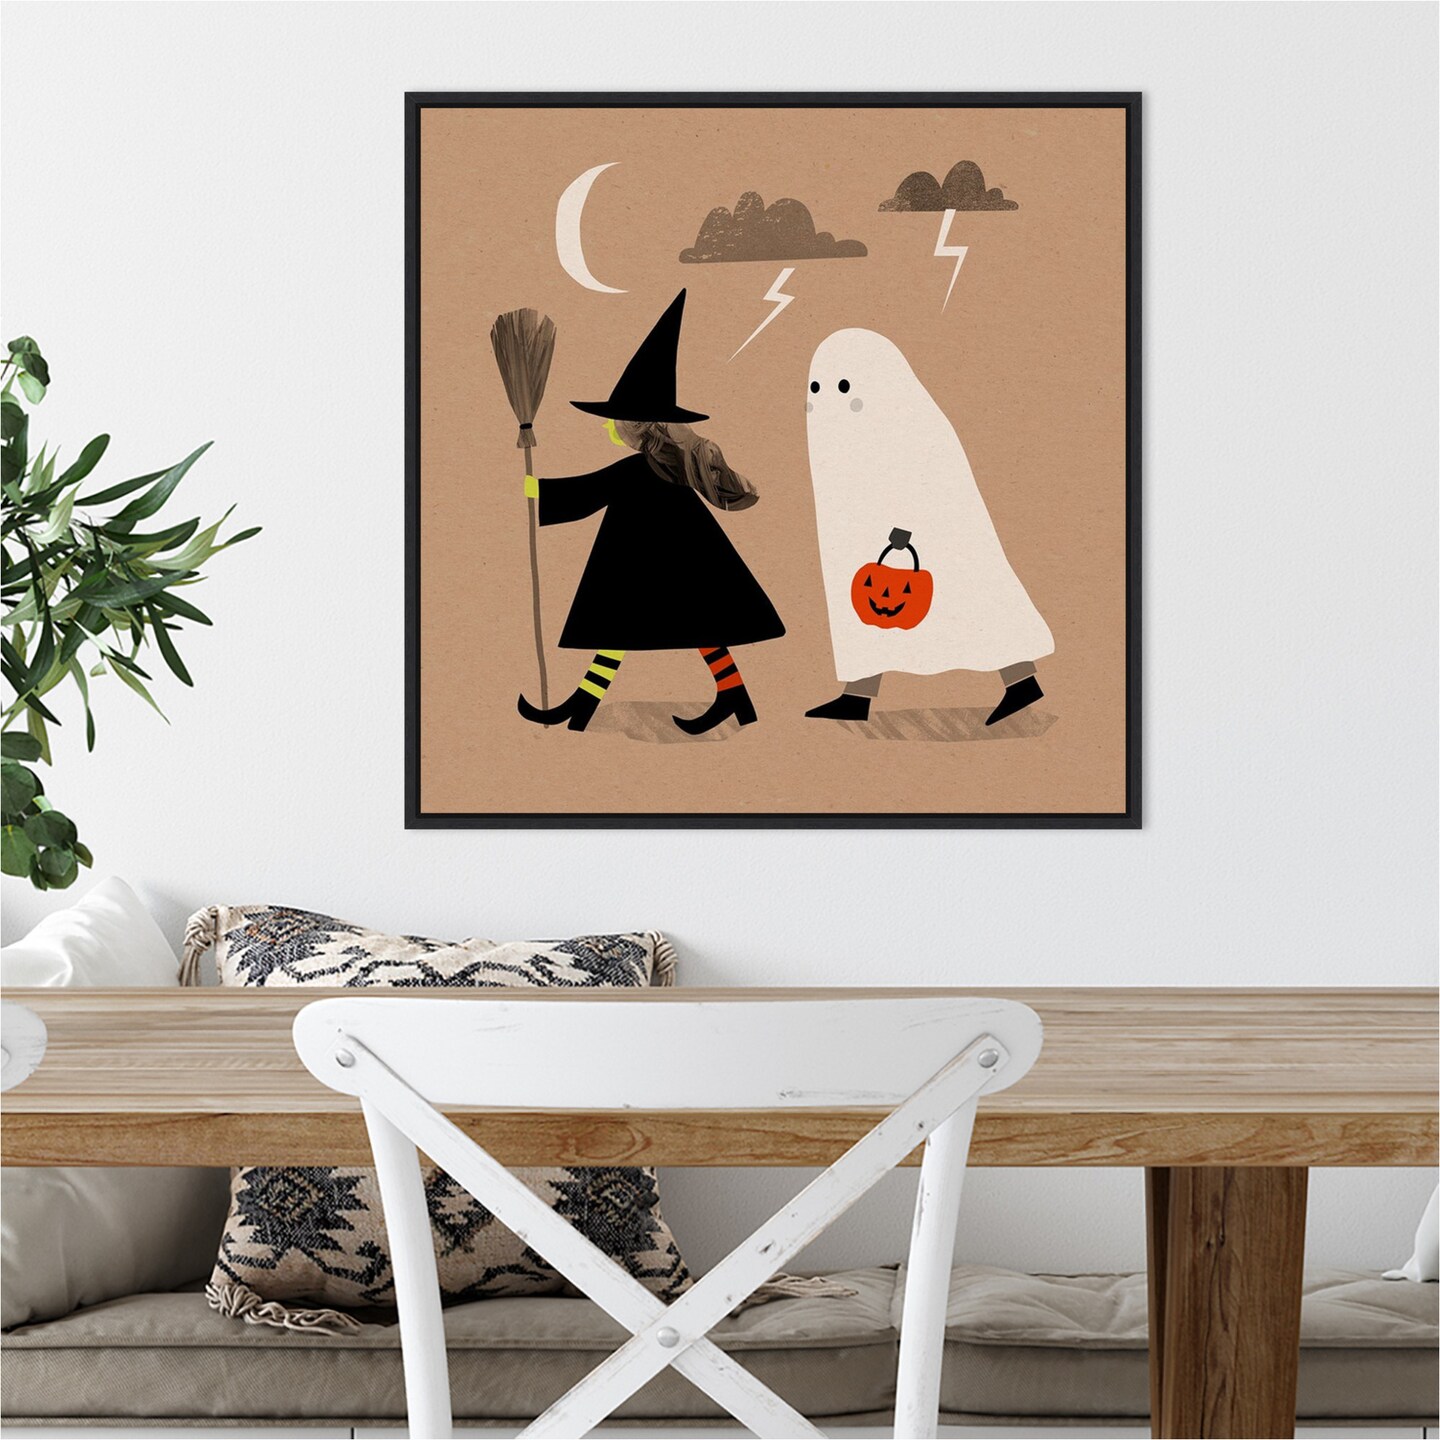 Halloween Witch Ghost Graphic III by Victoria Barnes 22-in. W x 22-in. H. Canvas Wall Art Print Framed in Black